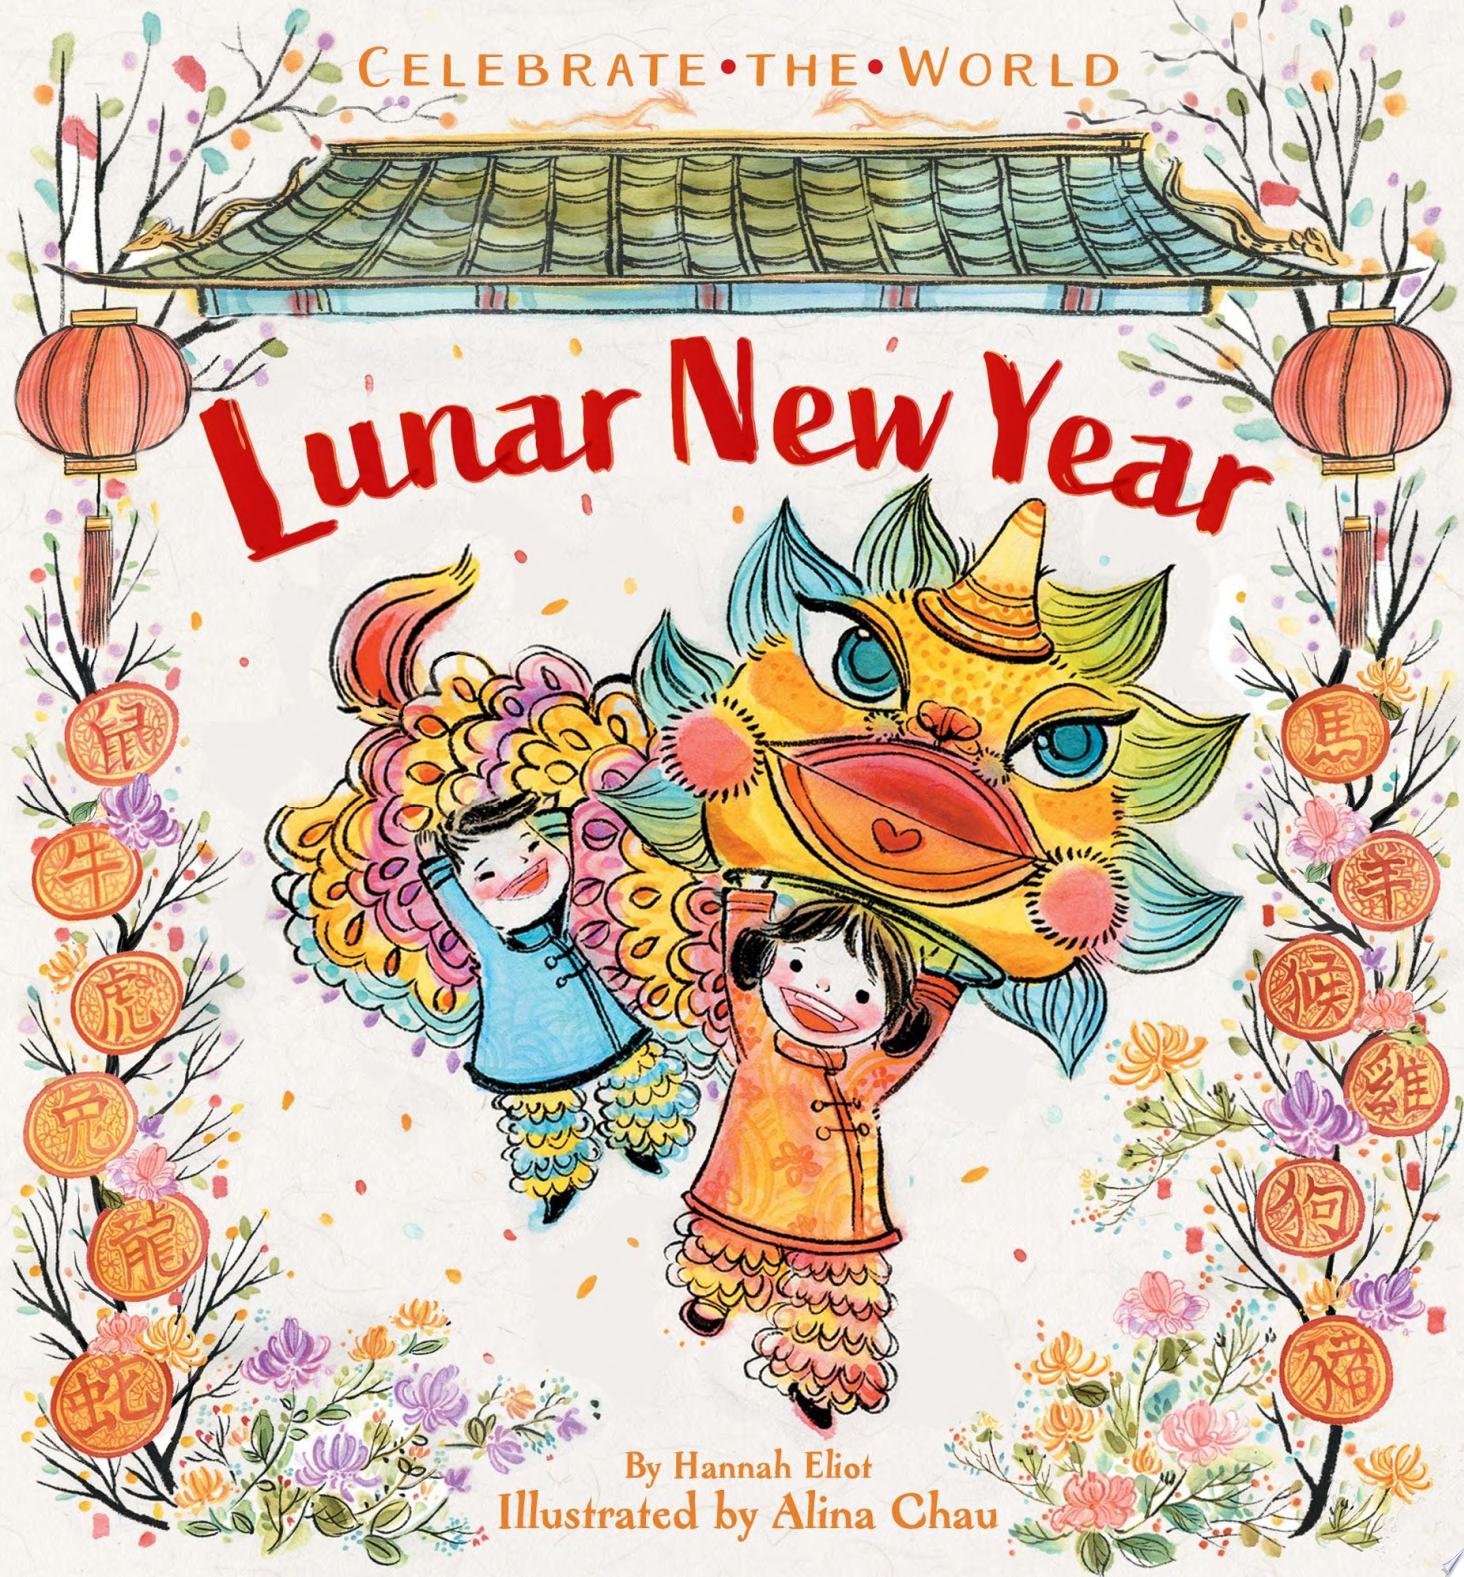 Image for "Lunar New Year"